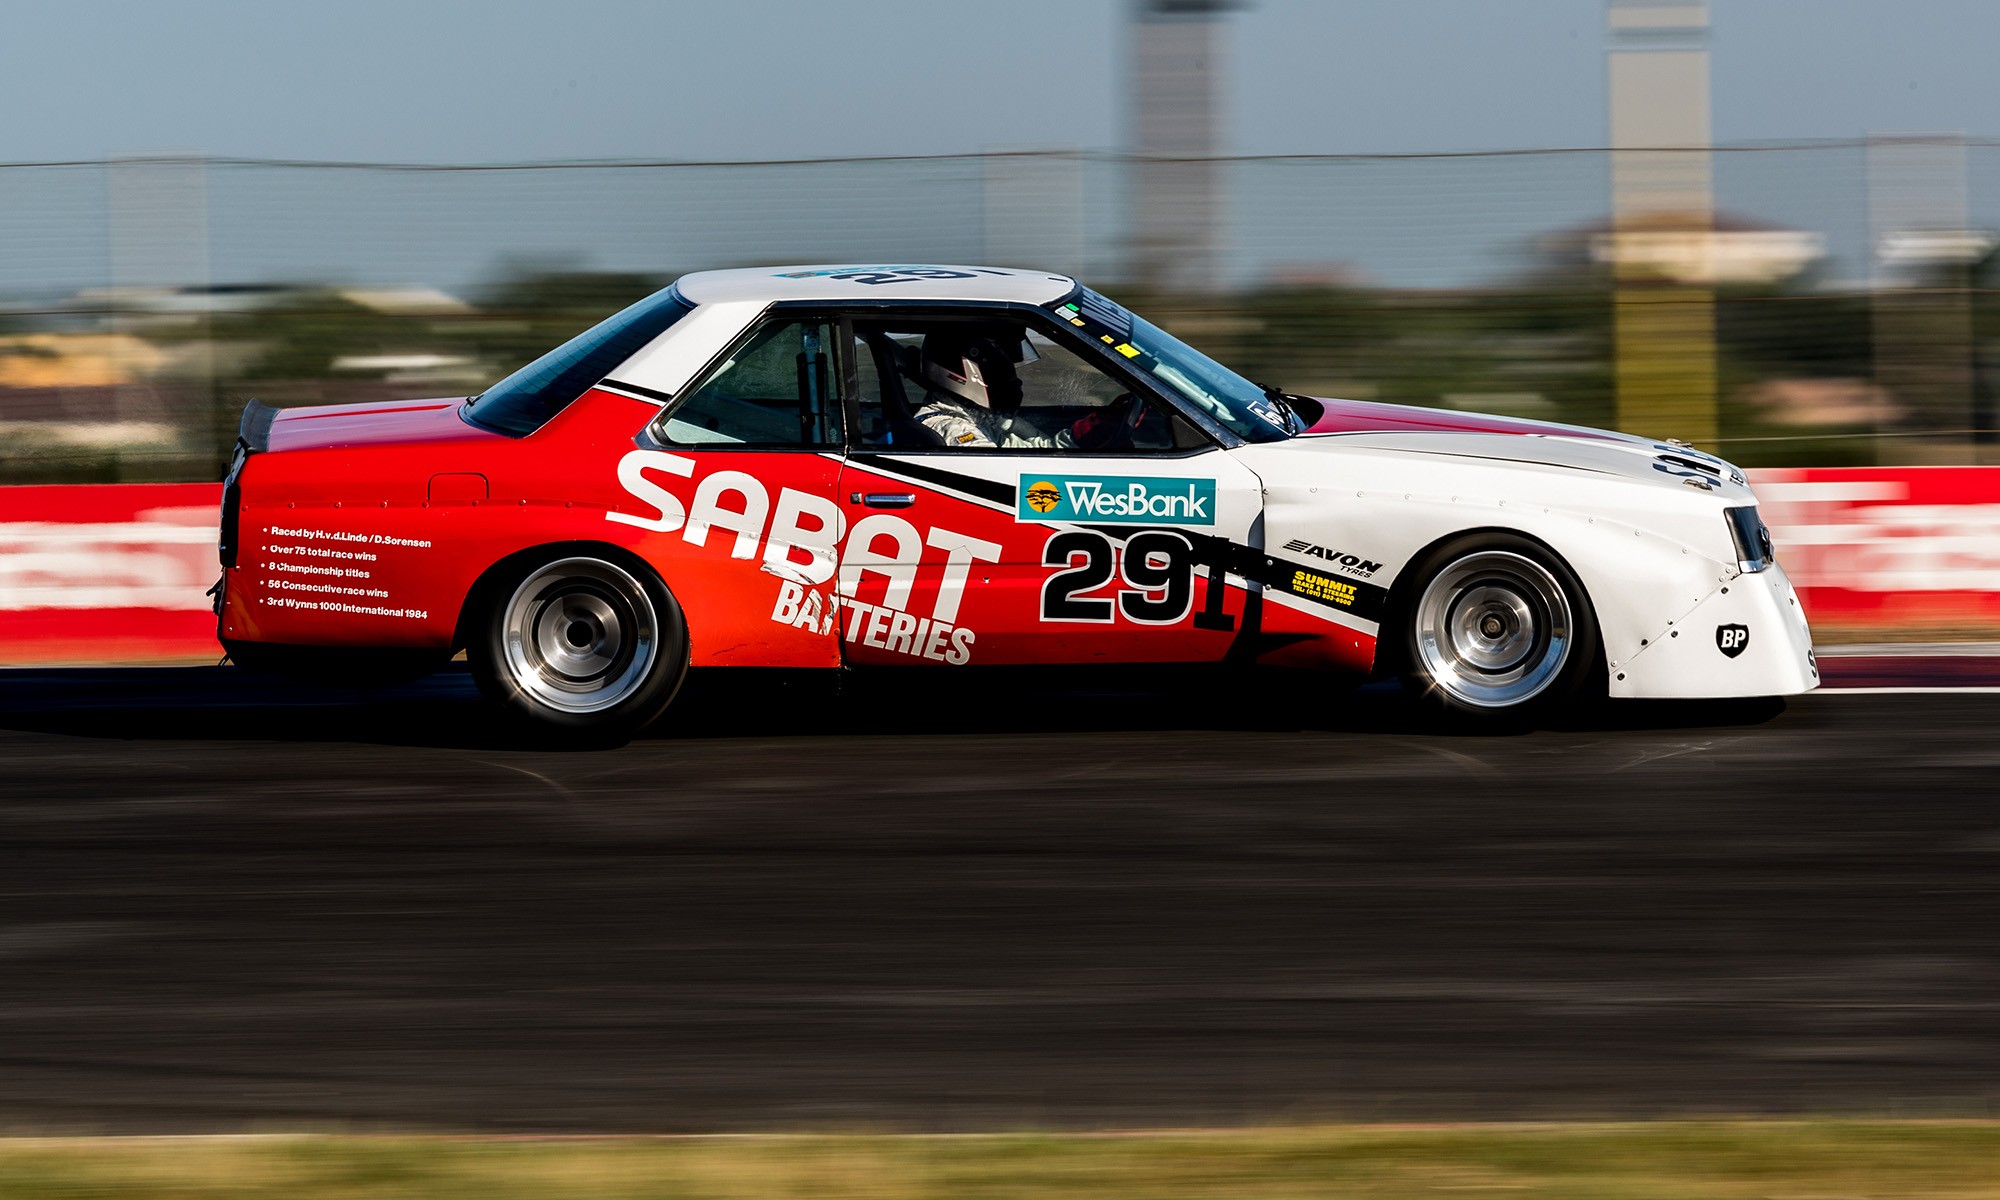 Qualifying was the first time Joubert drove the Sabat Nissan Skyline in anger